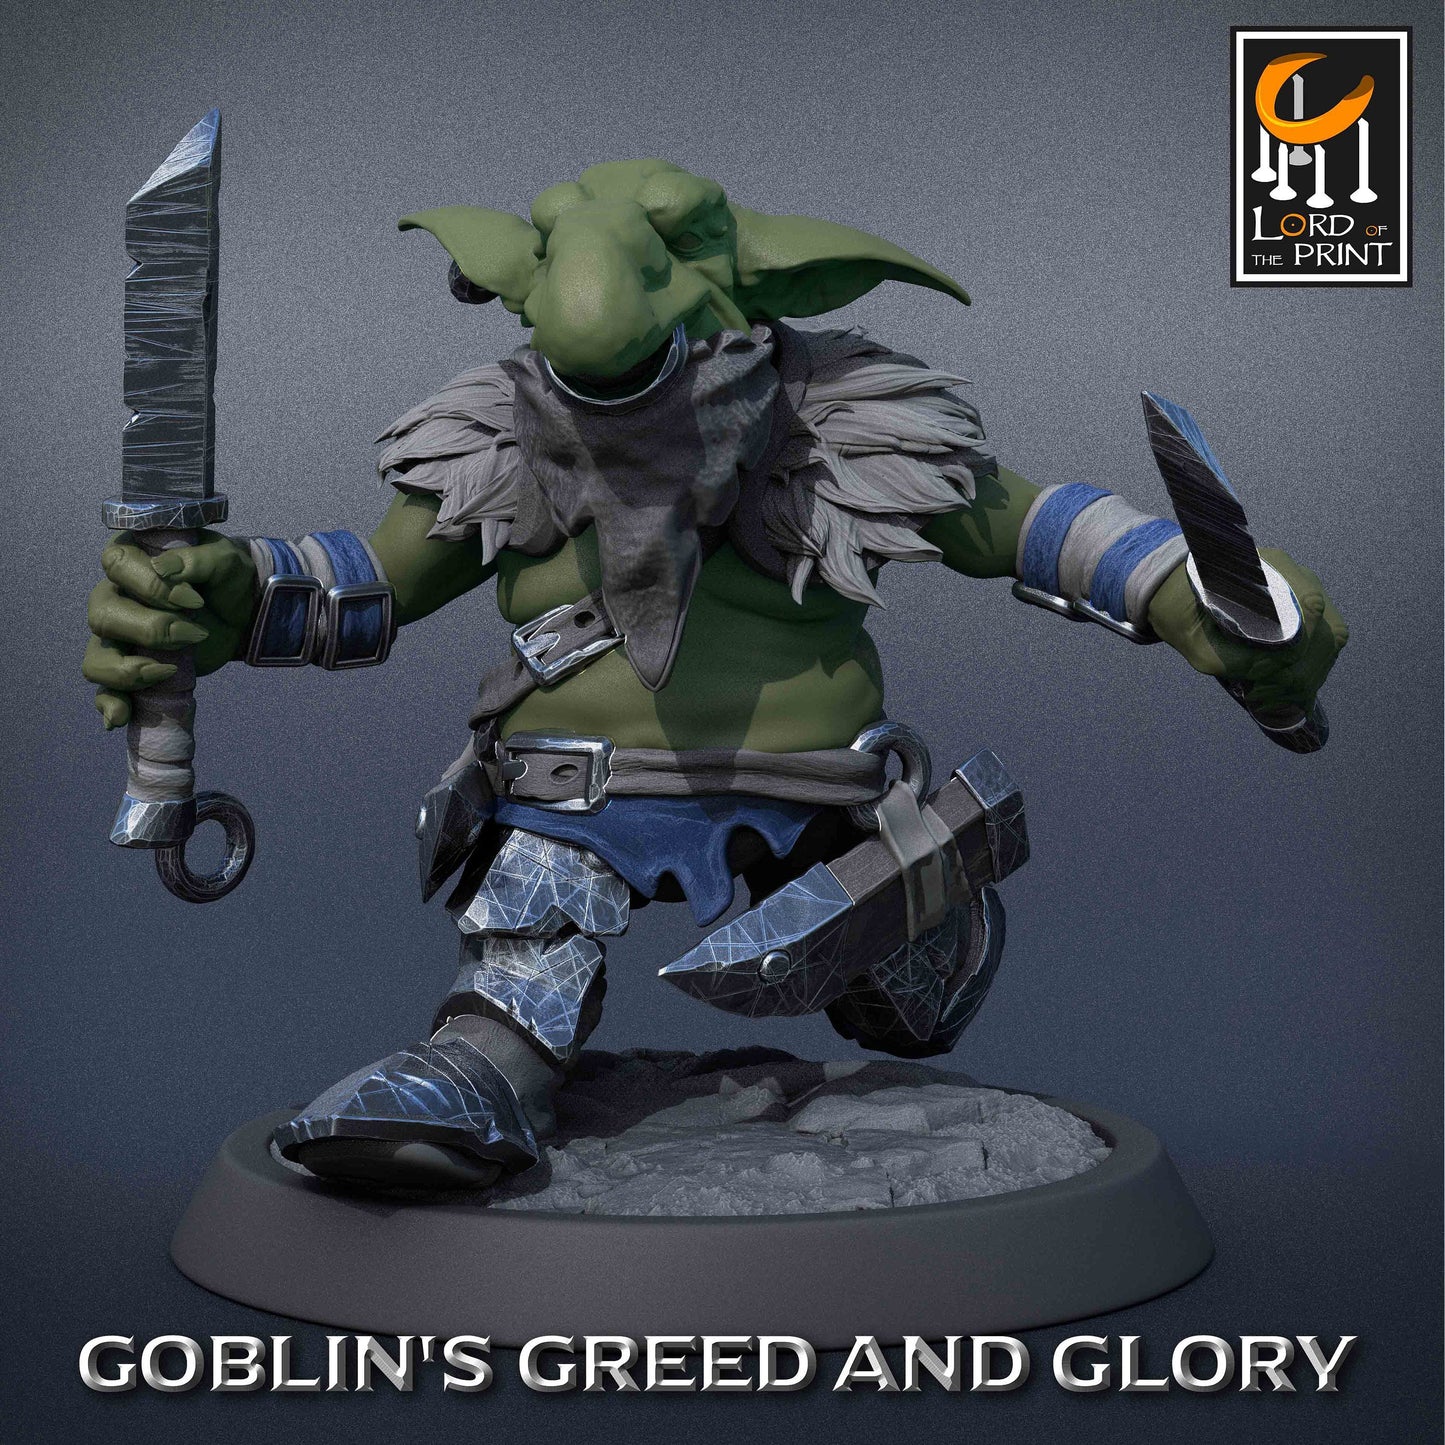 Goblin Rogue - Lord of the Print Miniature | Dungeons & Dragons | Pathfinder | Tabletop